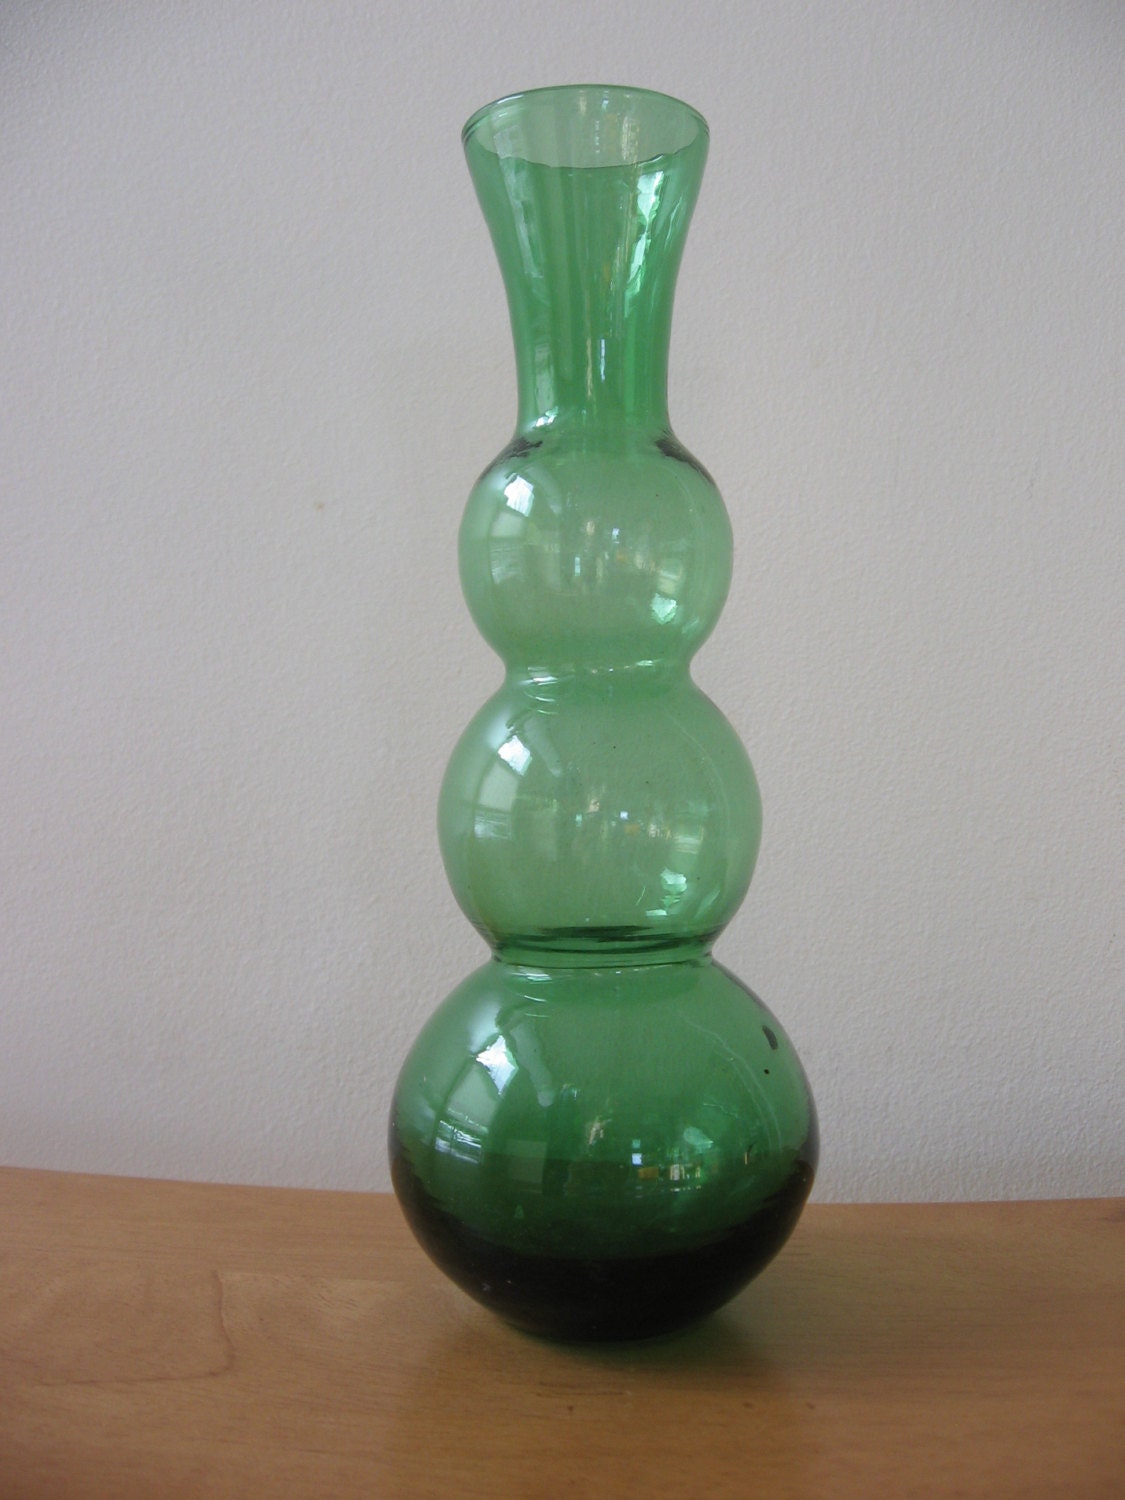 Green glass bottle vase three round shapes stacked MCM